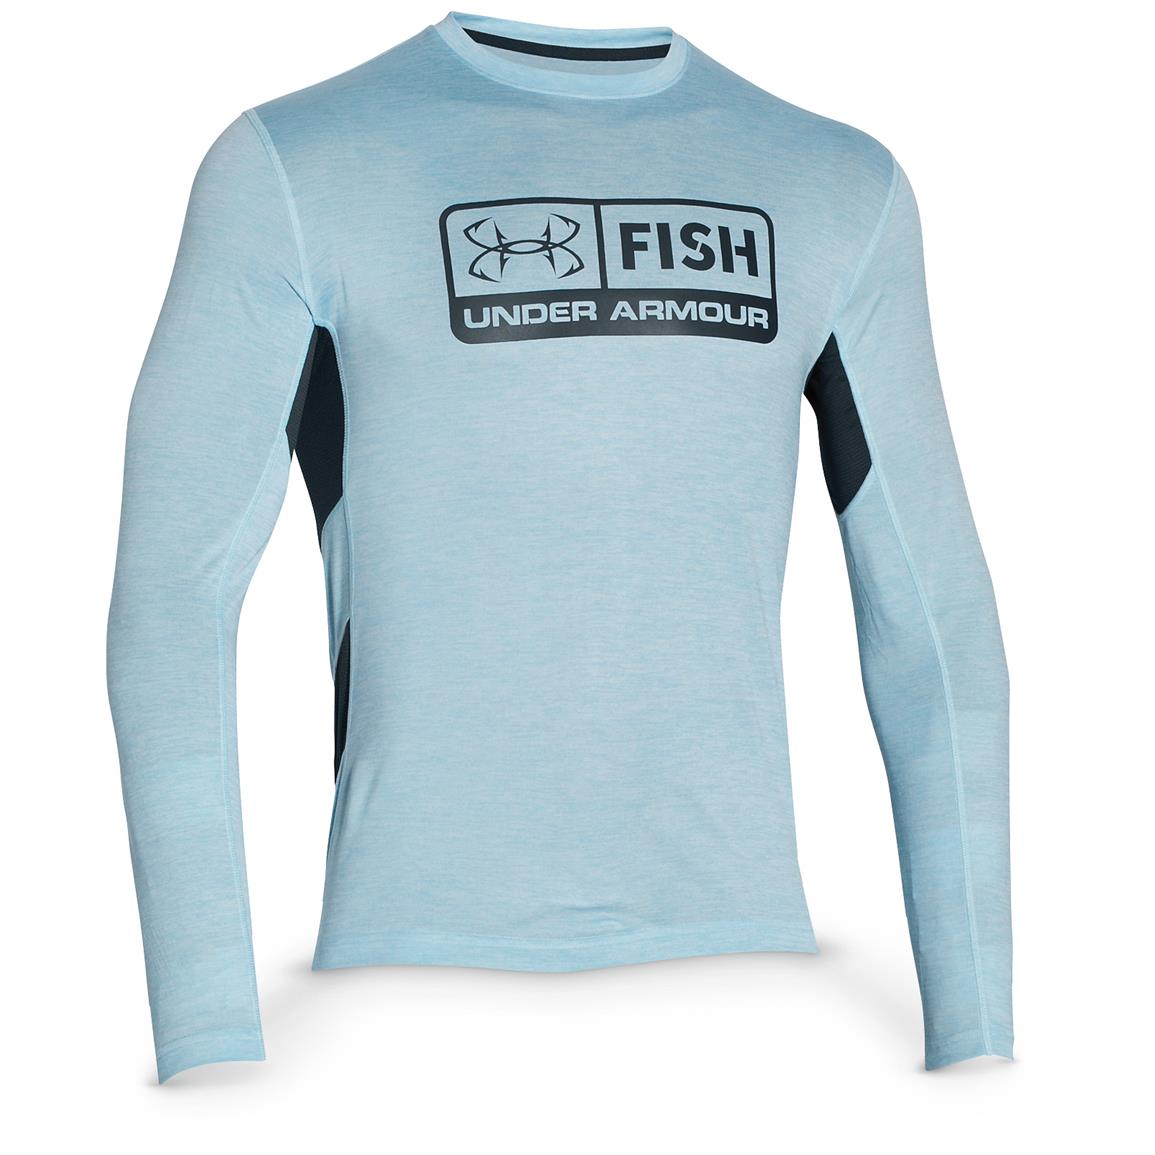 Under Armour Fishing Apparel